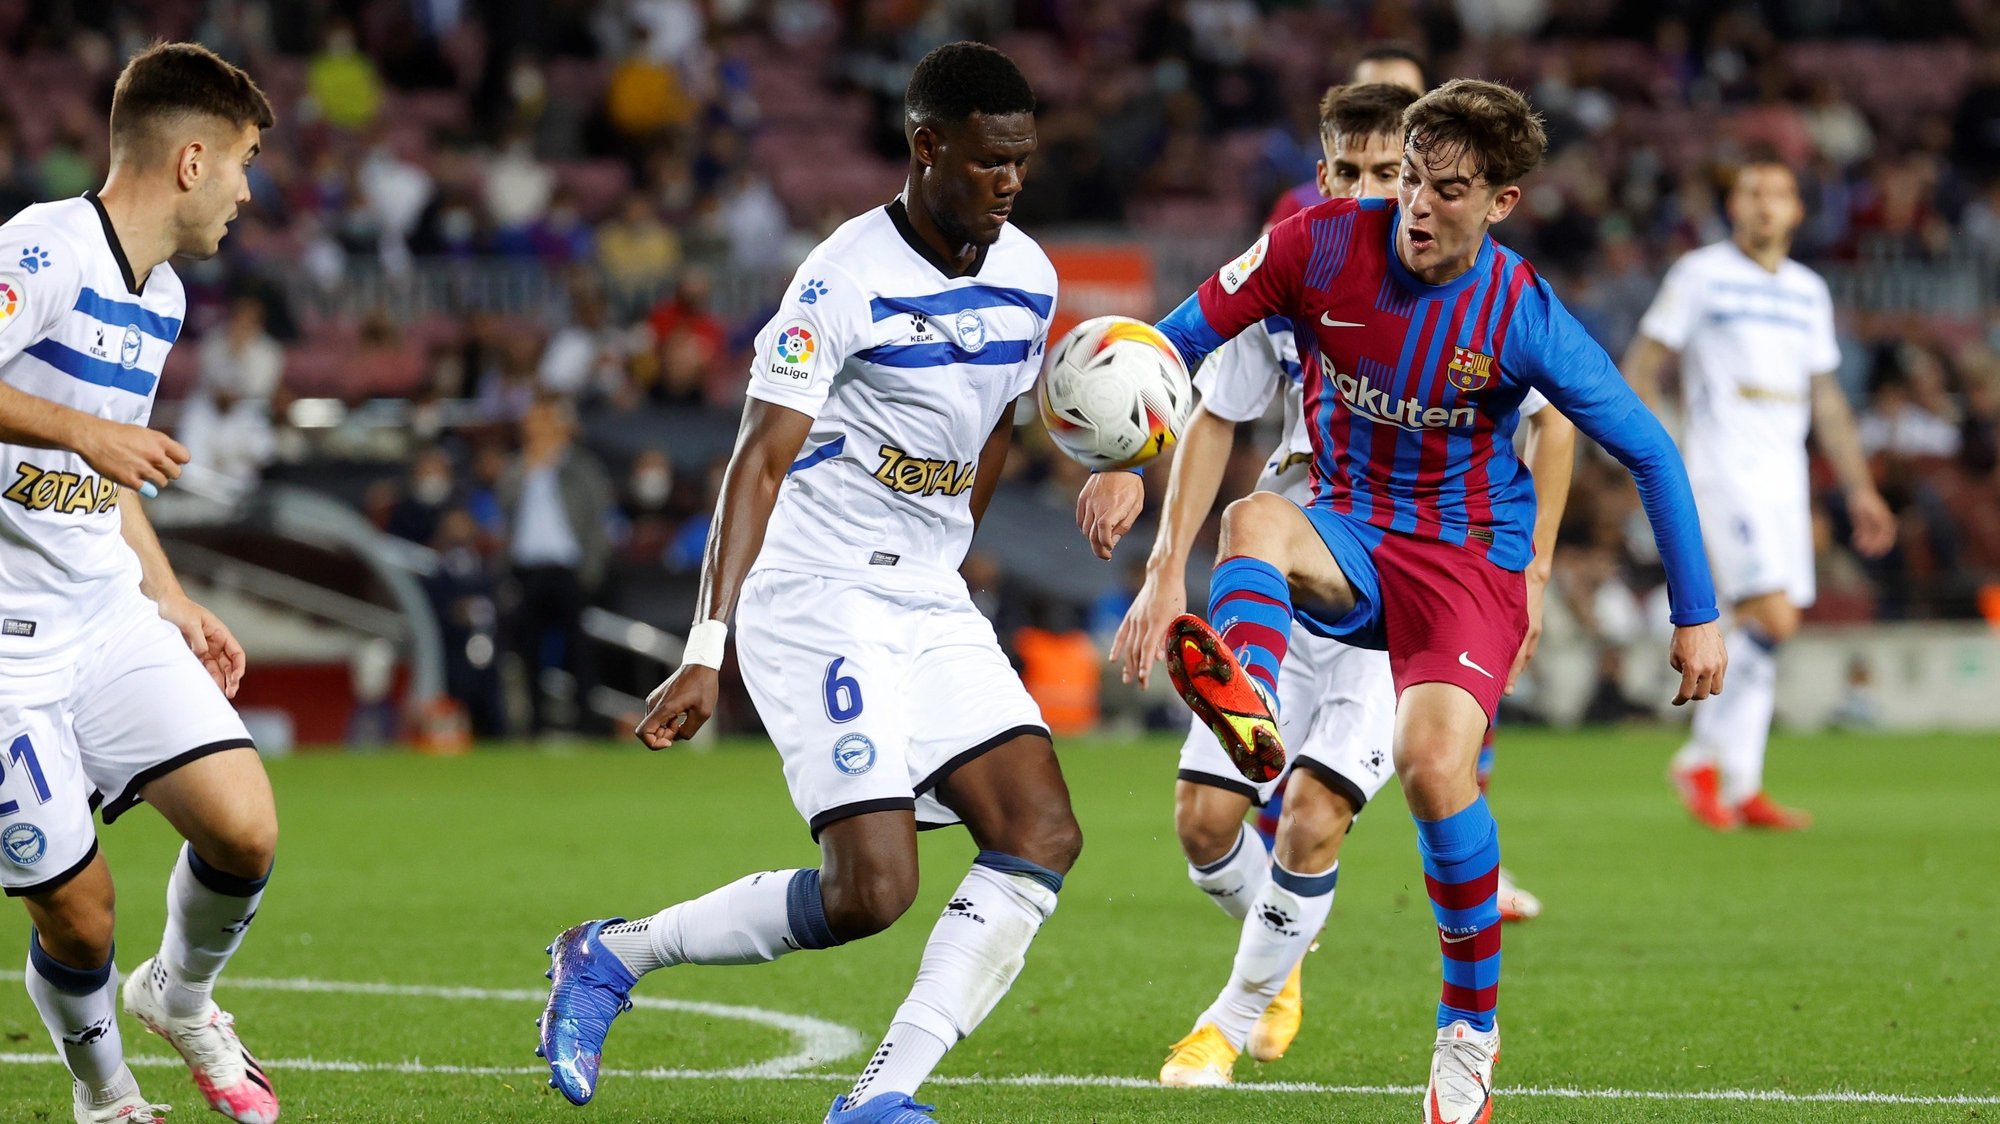 epa09555156 FC Barcelona&#039;s midfielder Gavi (R) vies for the ball with Alaves&#039; midfielder Mamadou Loum N&#039;Diaye (C) during the Spanish LaLiga soccer match between FC Barcelona and Deportivo Alaves held at Camp Nou stadium in Barcelona, Spain, 30 October 2021.  EPA/Toni Albir